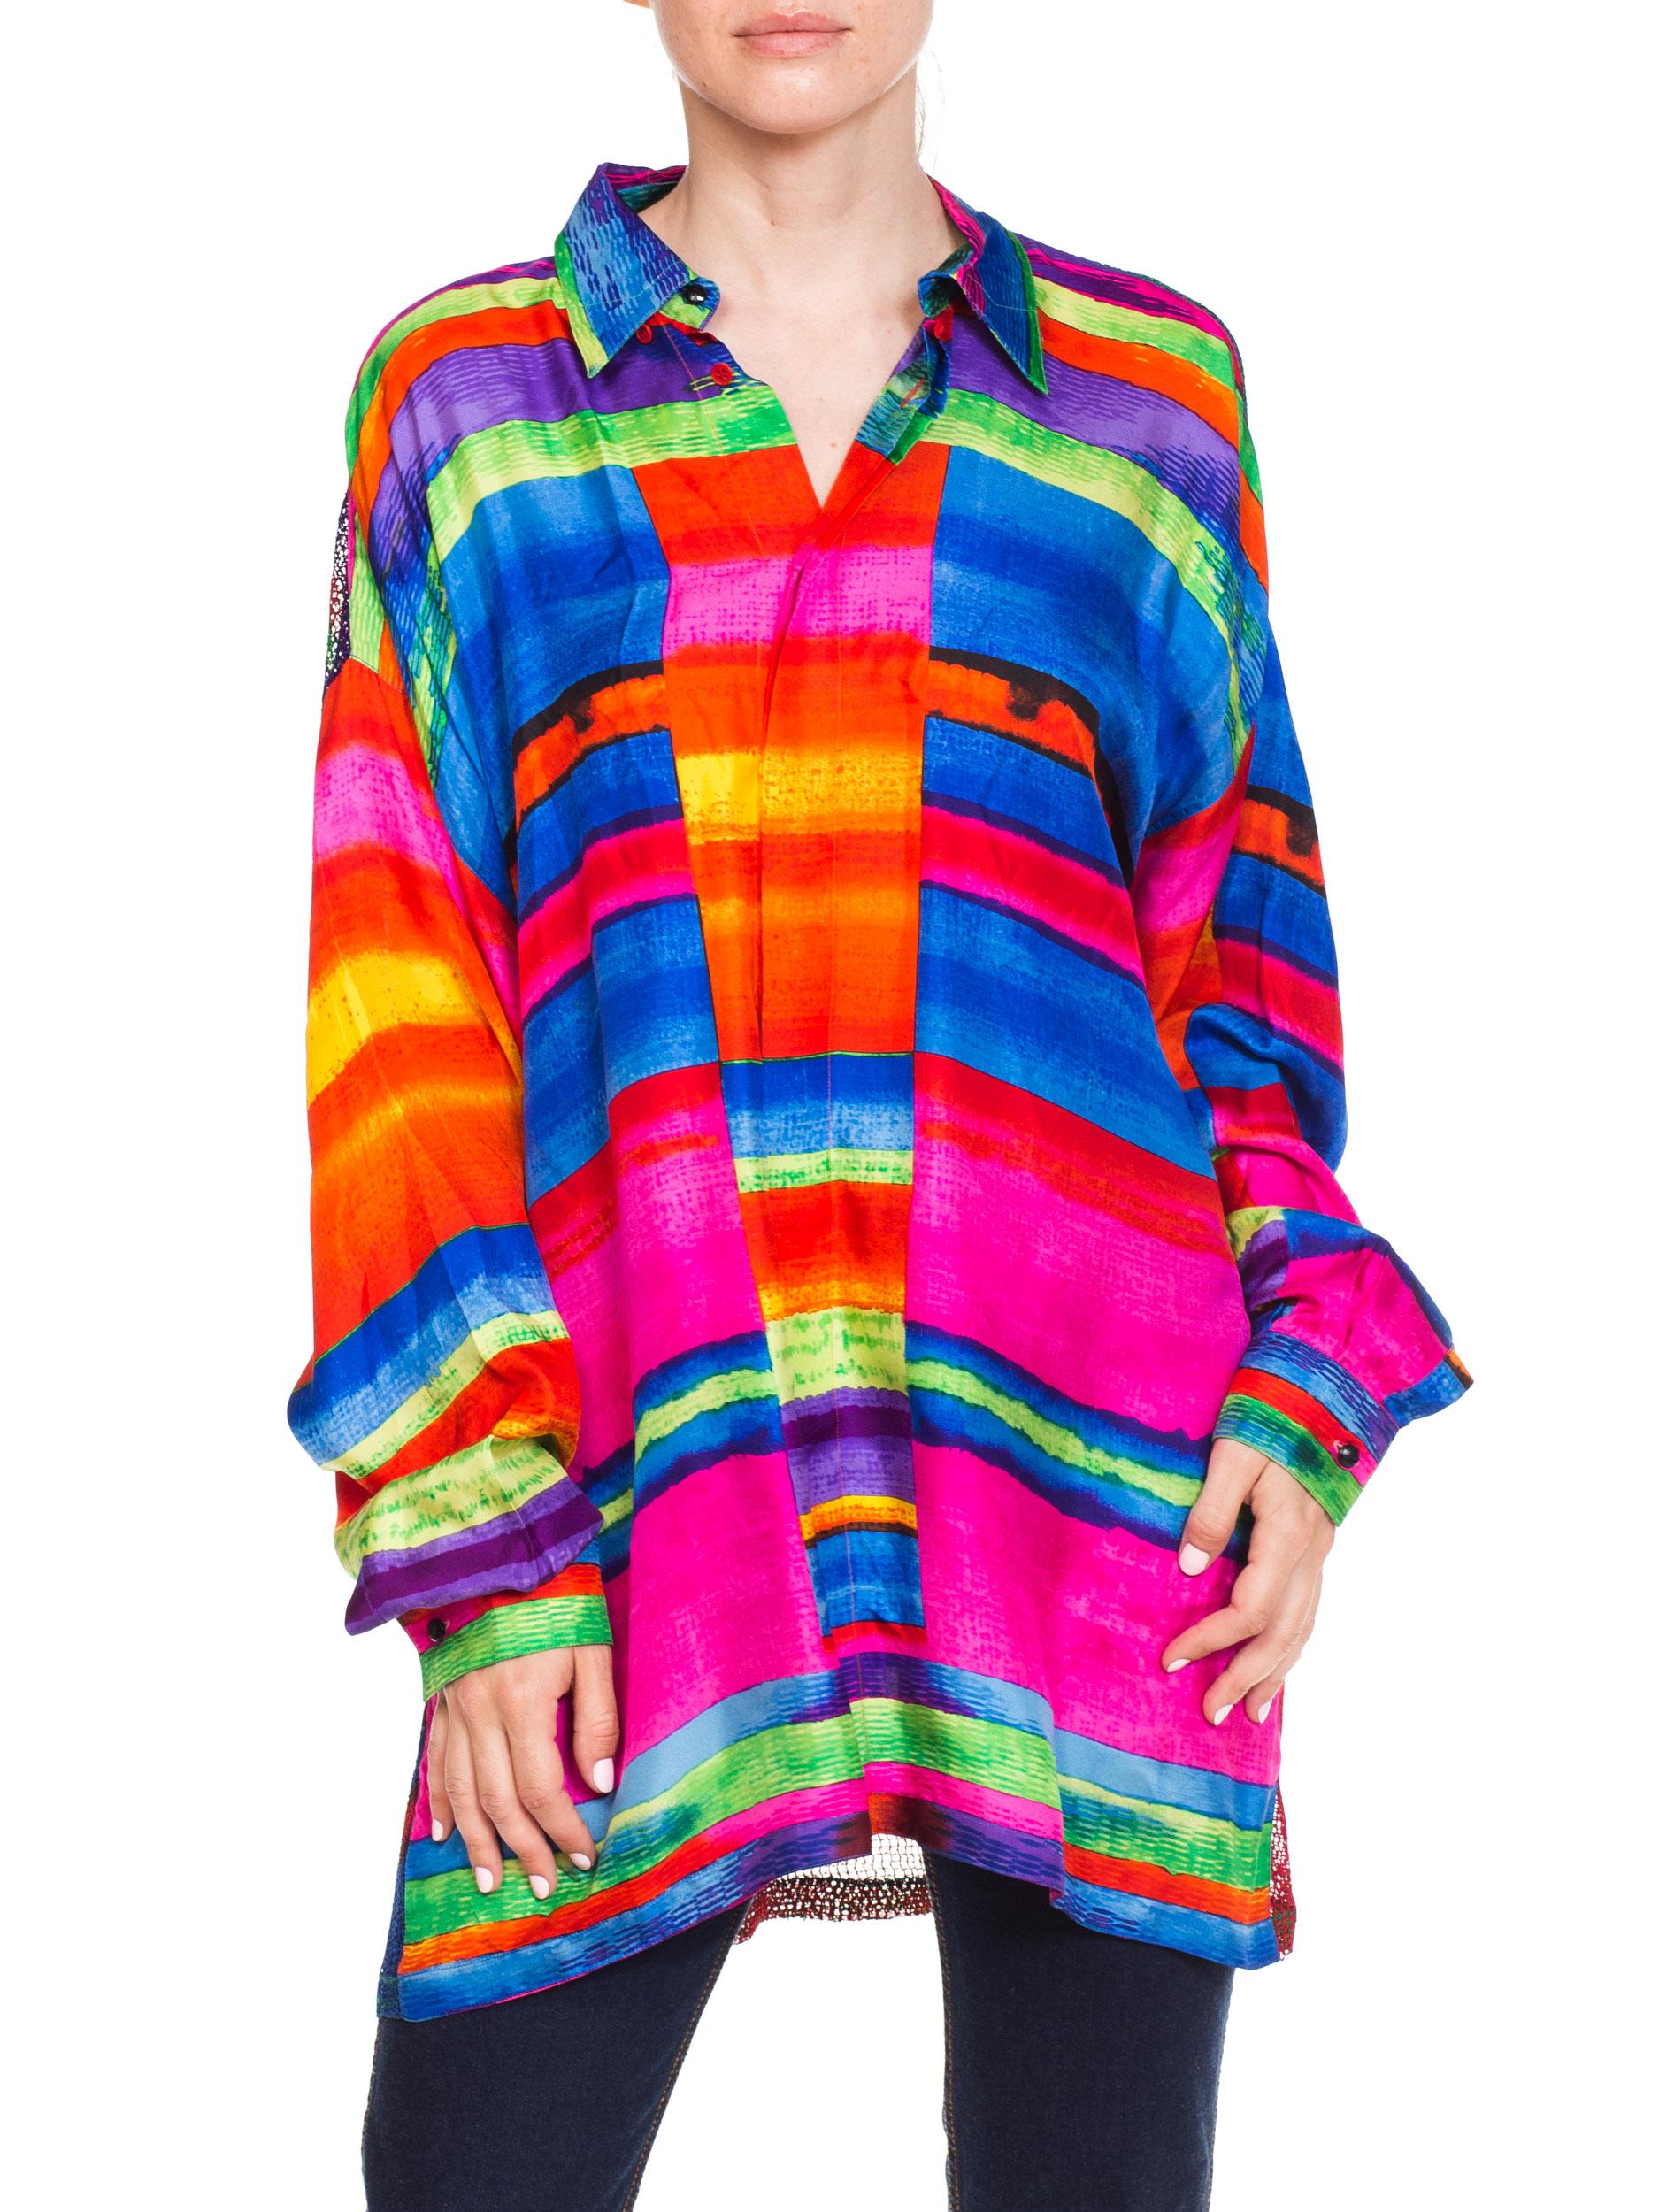 1990S GIANNI VERSACE Silk Men's Colorful Shirt With Sheer Net Back Panel 3